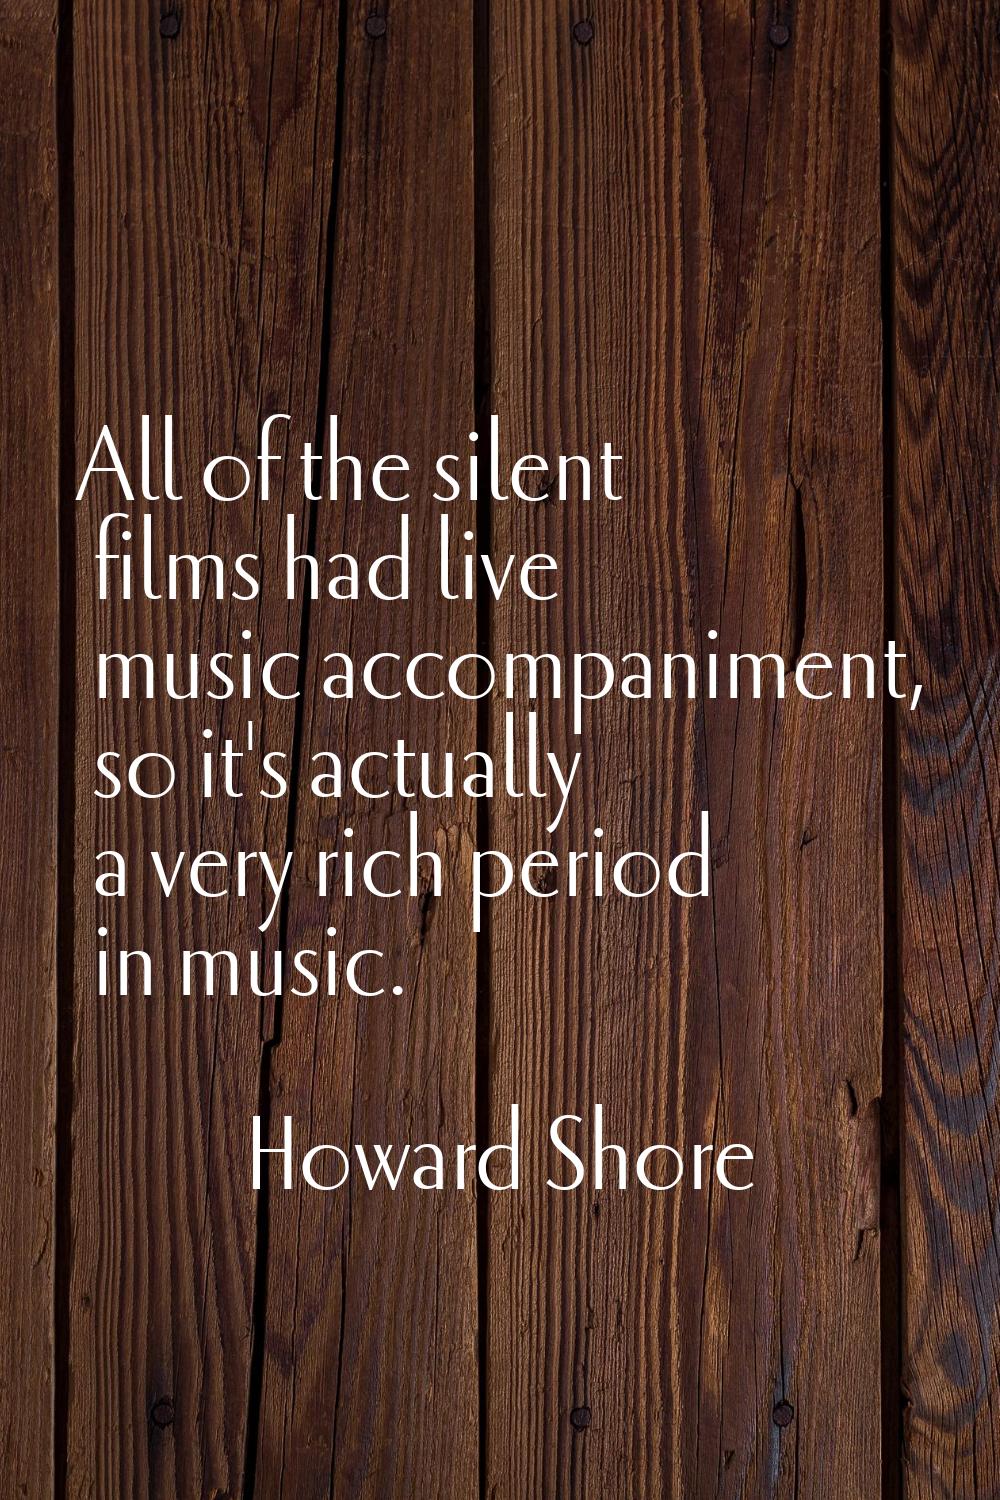 All of the silent films had live music accompaniment, so it's actually a very rich period in music.